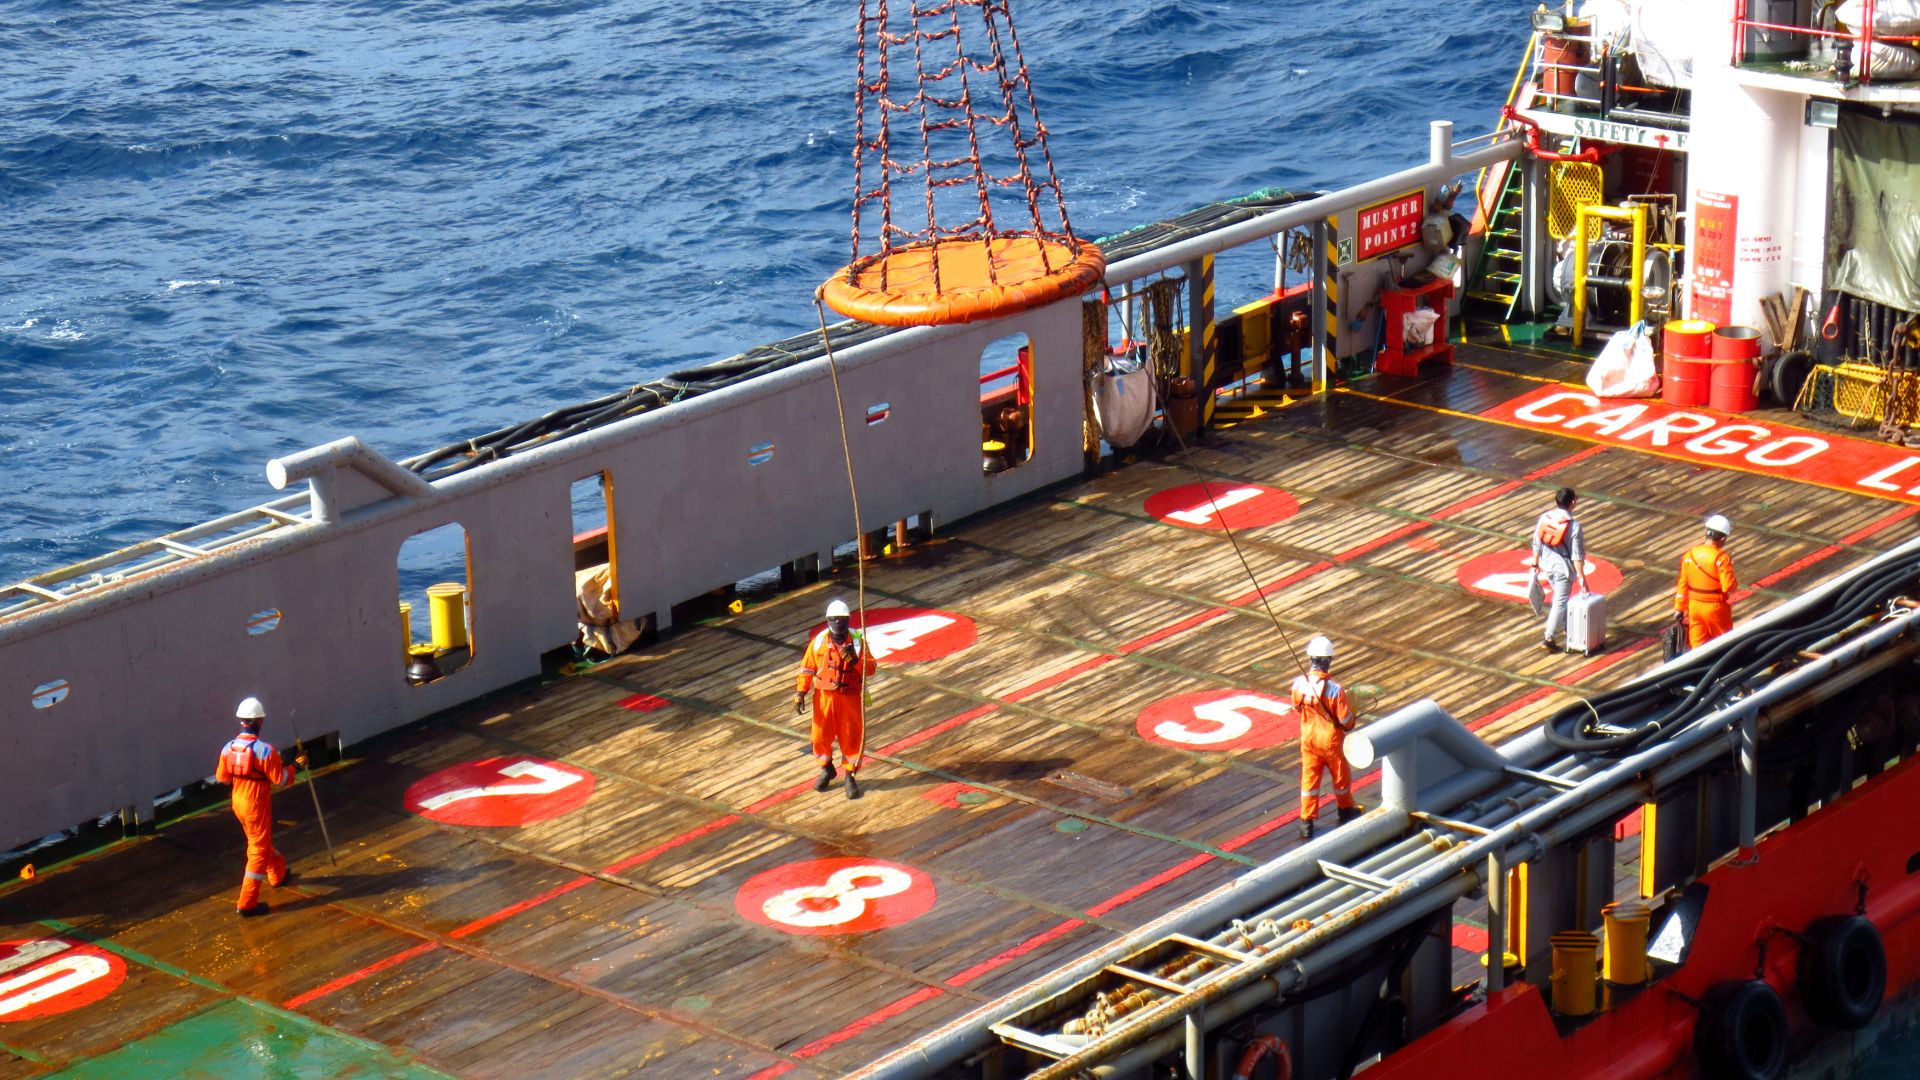 Seafarers working on a ship deck, cargo operations underway with safety gear visible, emphasizing maritime labor and safety standards.